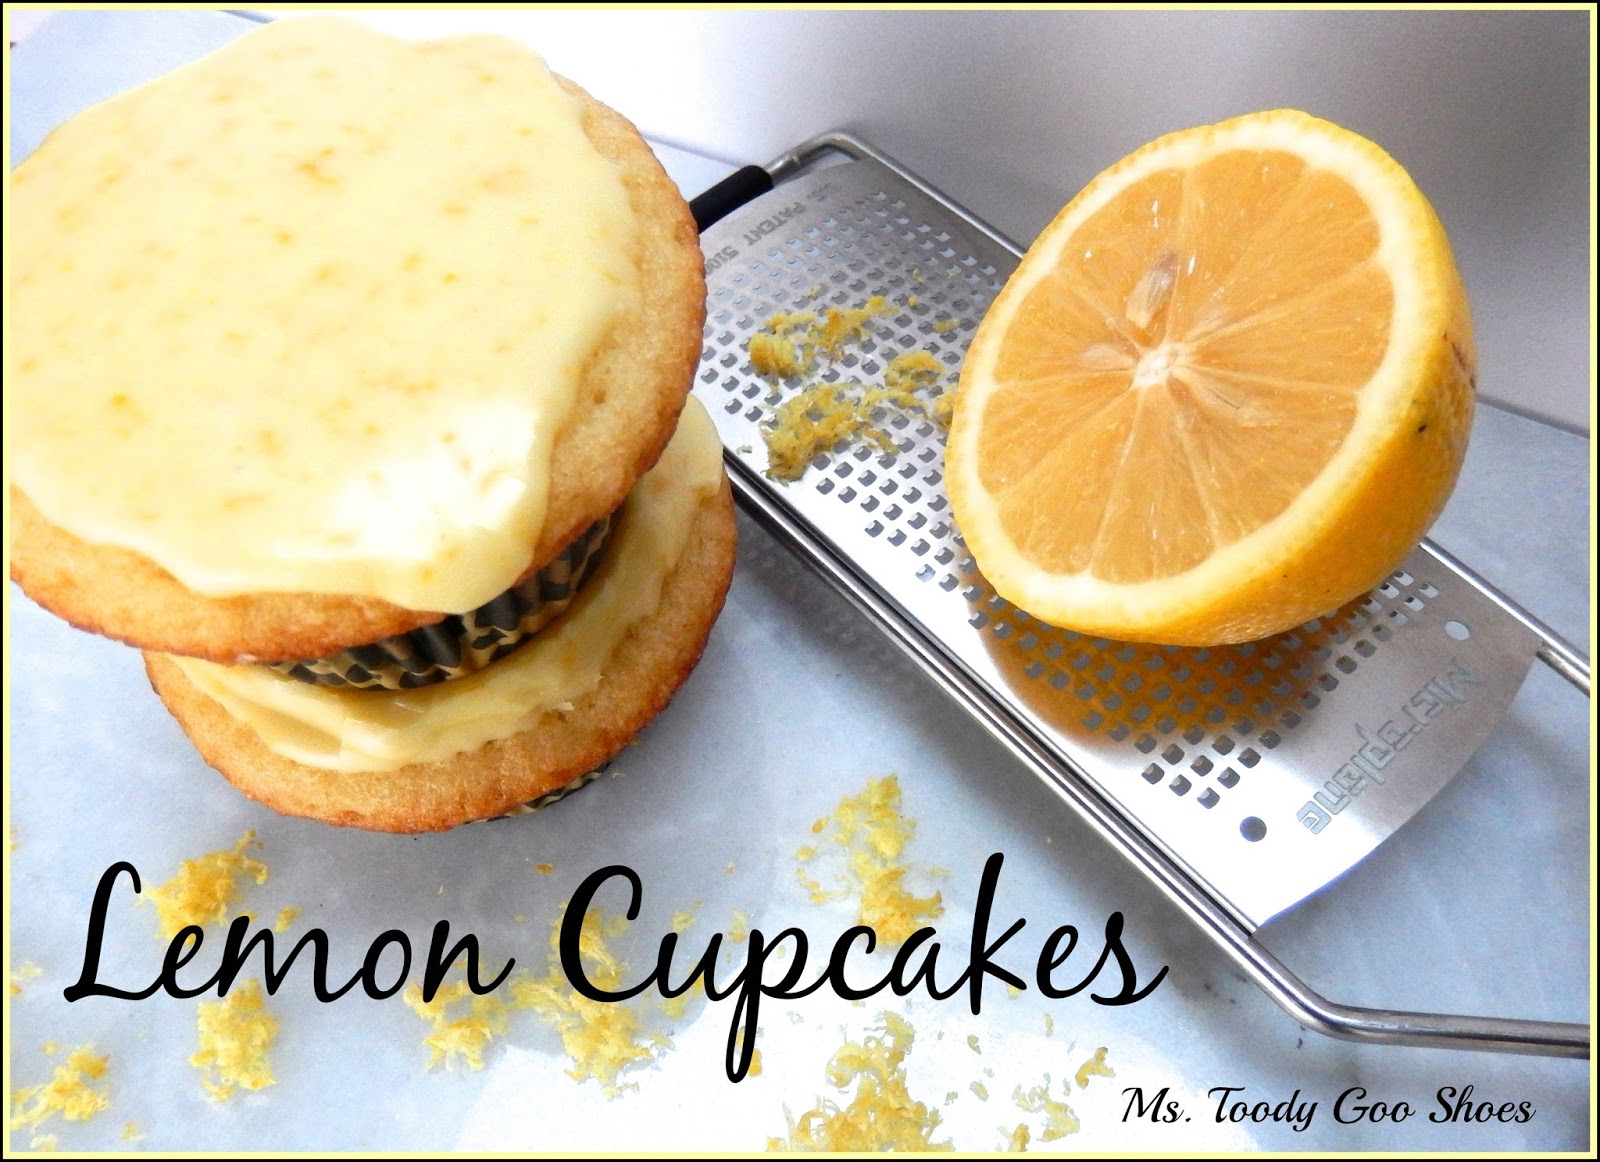 Lemon Cupcakes: Lemony goodness in every bite from #FlatBellyDiet Cookbook  ---Ms. Toody Goo Shoes.